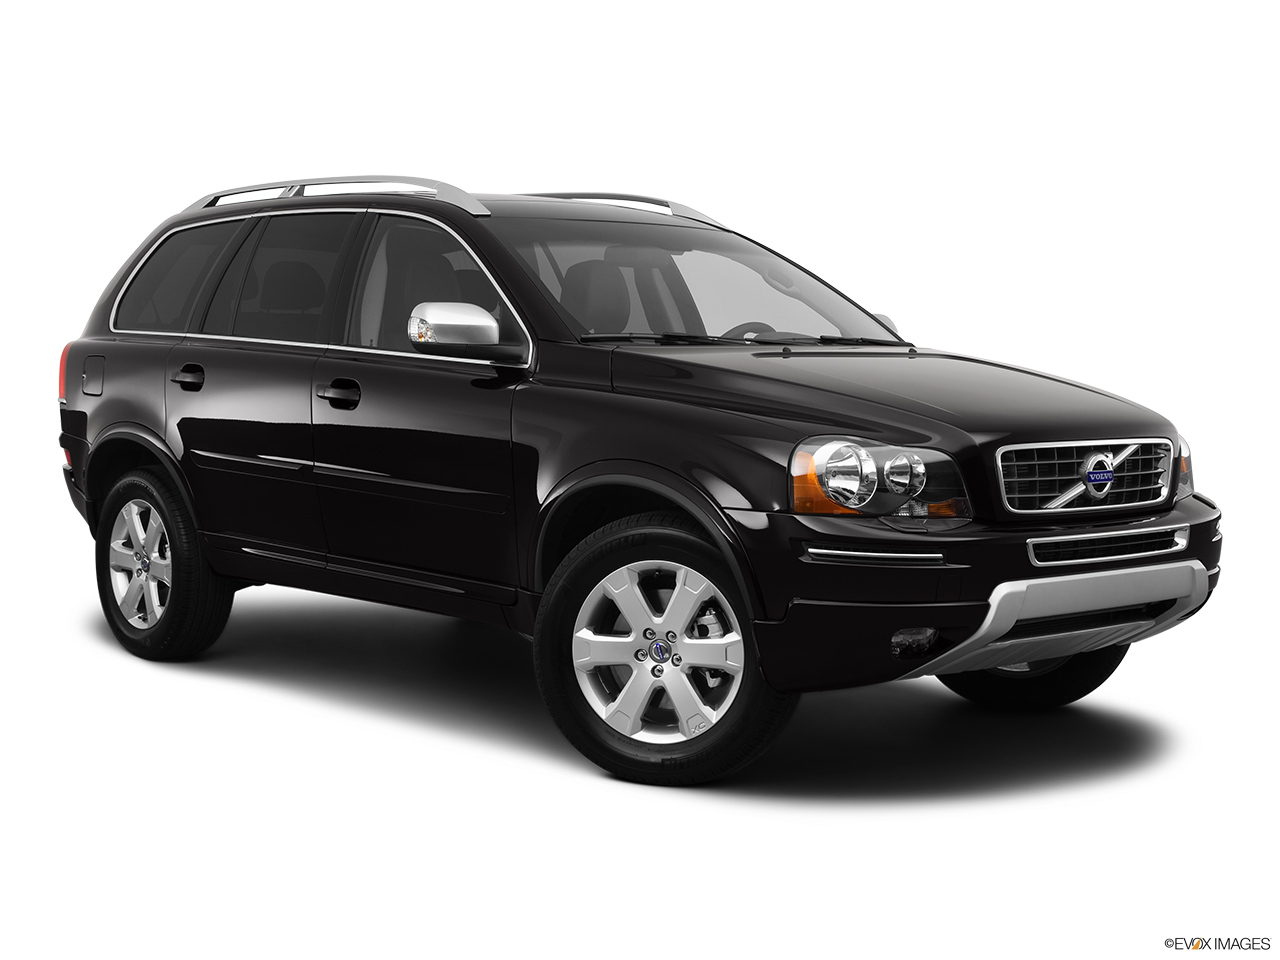 2013 Volvo XC90 3.2 FWD Base Front passenger 3/4 w/ wheels turned. 